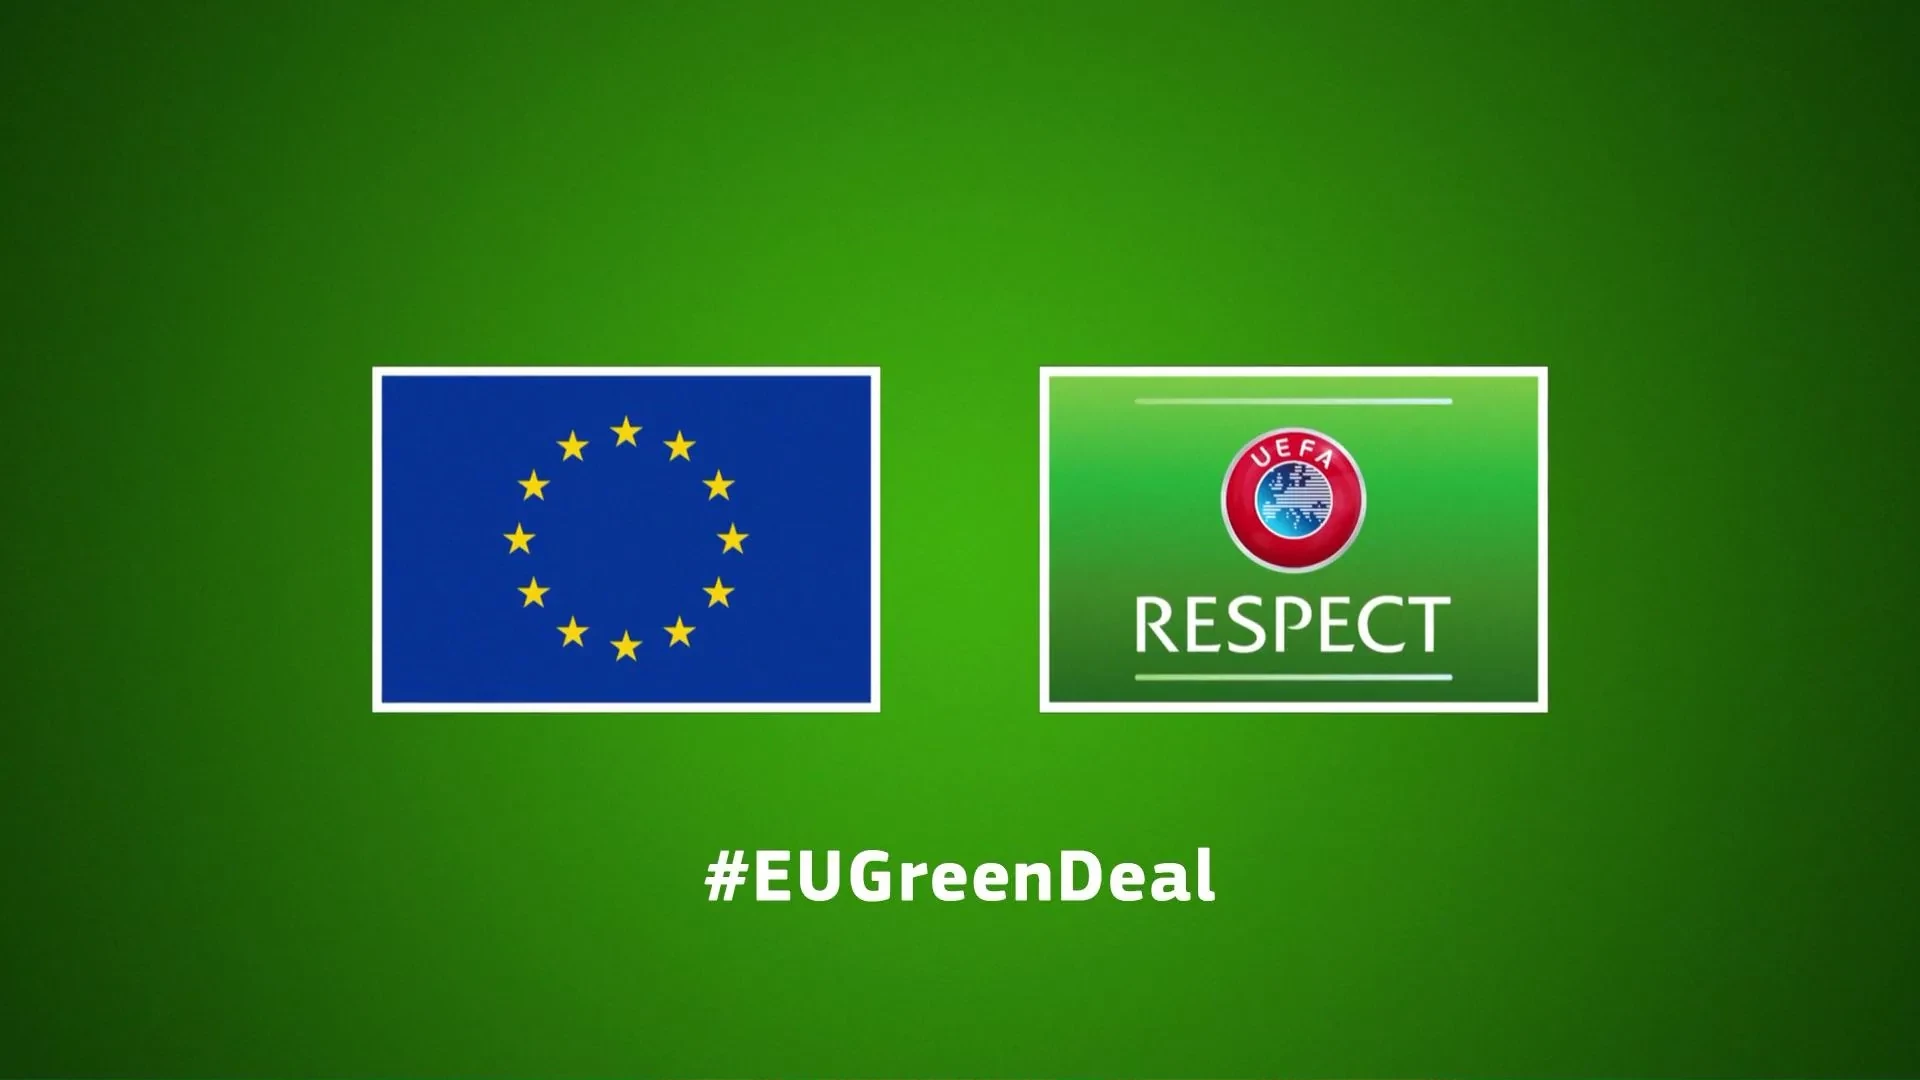 UEFA launches new TV advert with European Commission to promote climate action